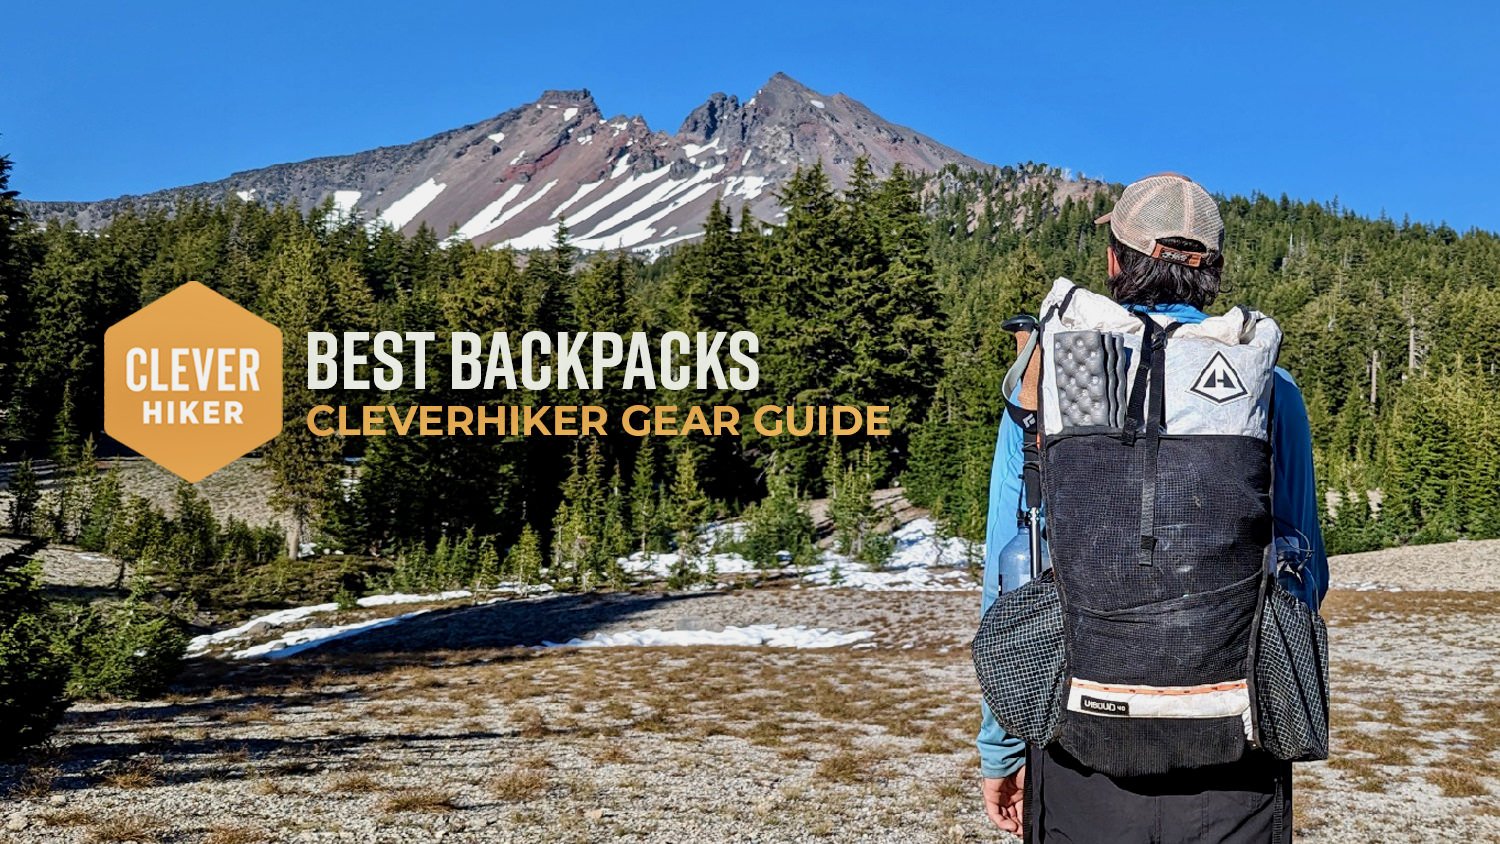 Backpacking FAQs - Your ESSENTIAL Questions Answered!